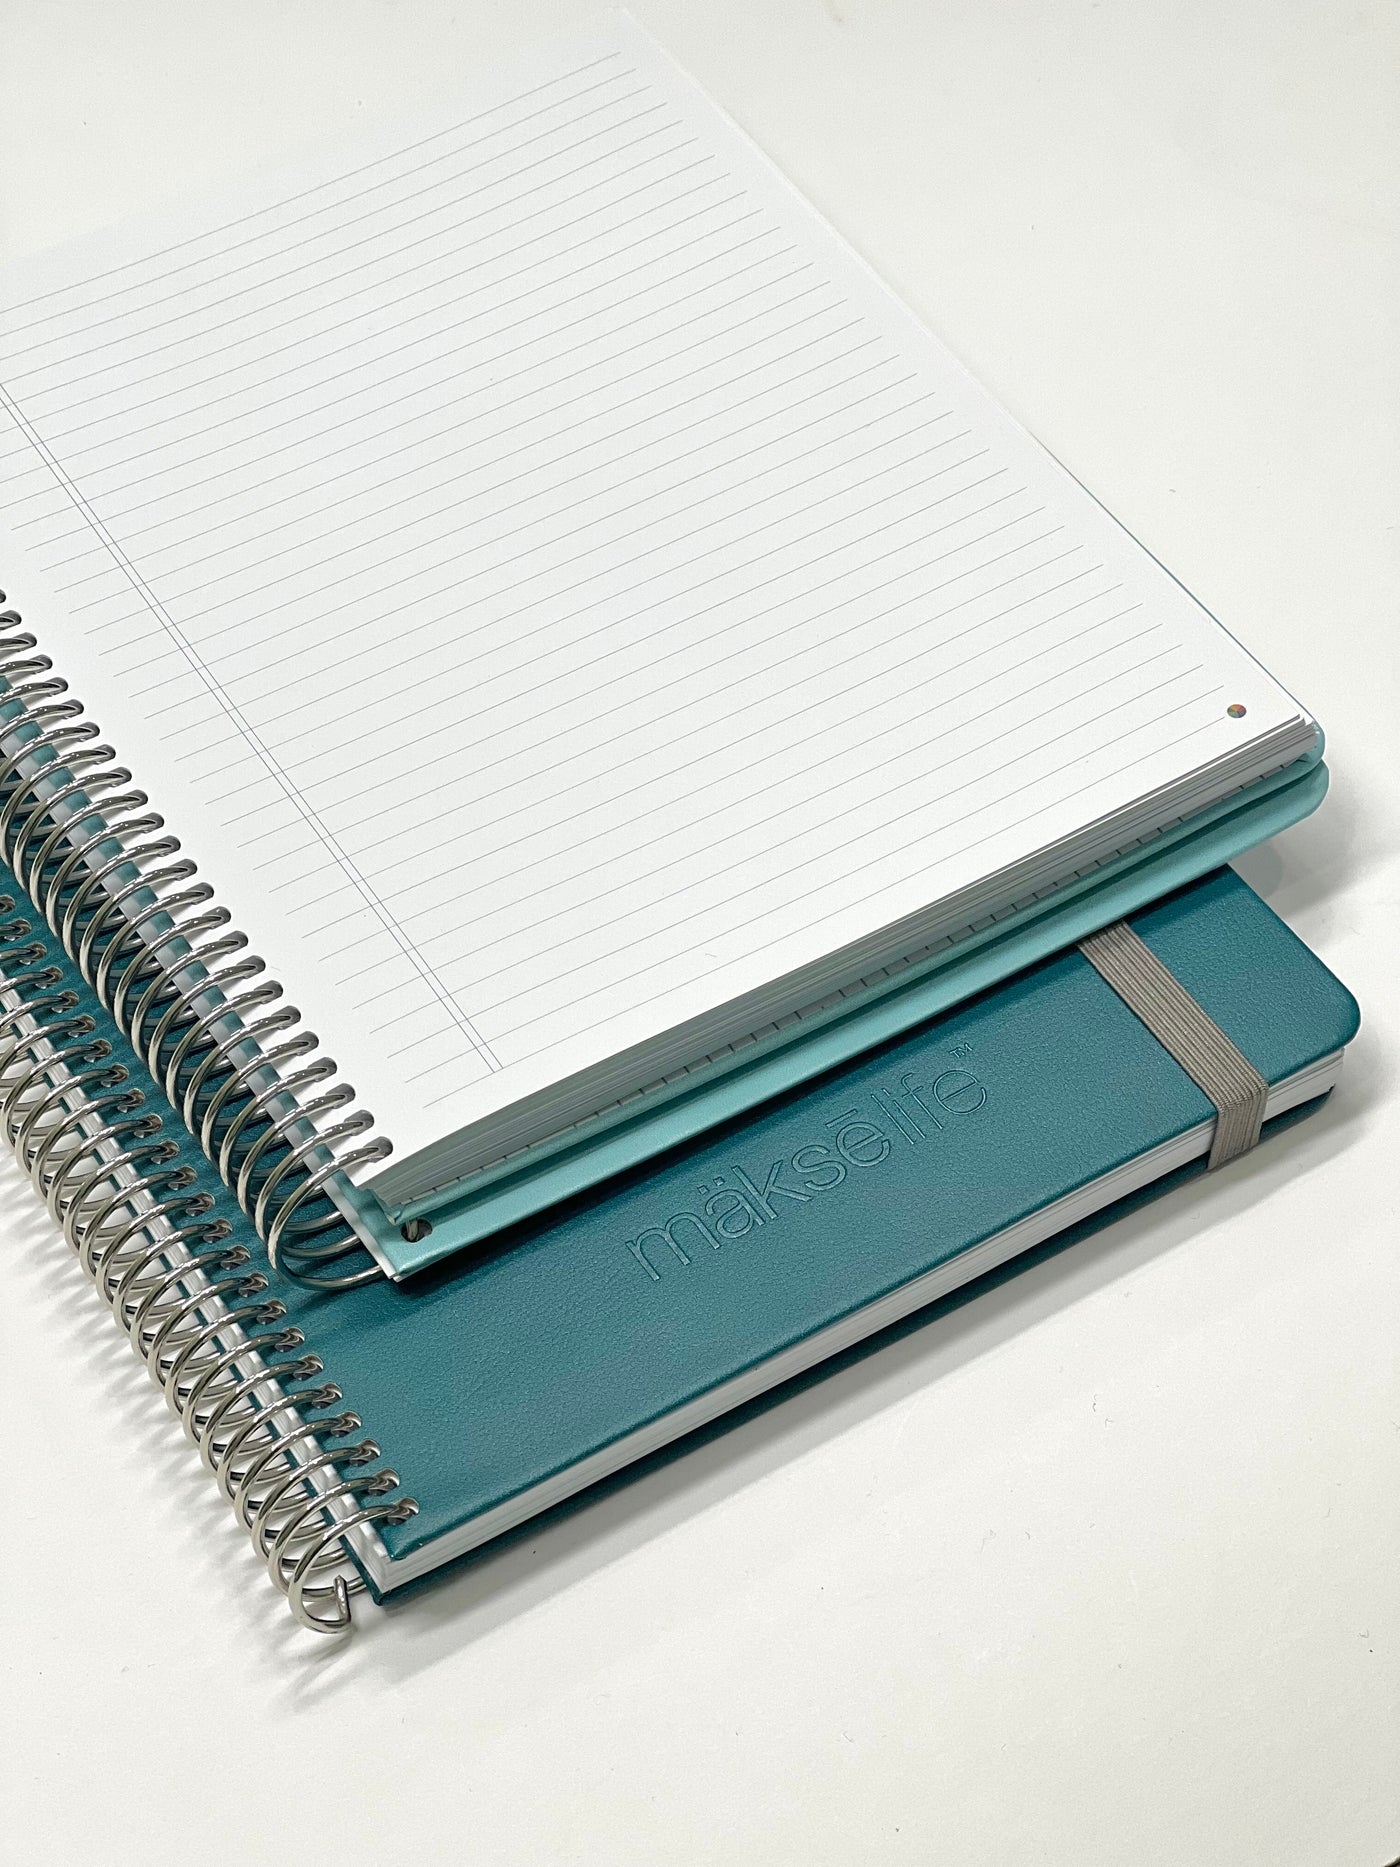 Lined Spiral Notebook - Storm